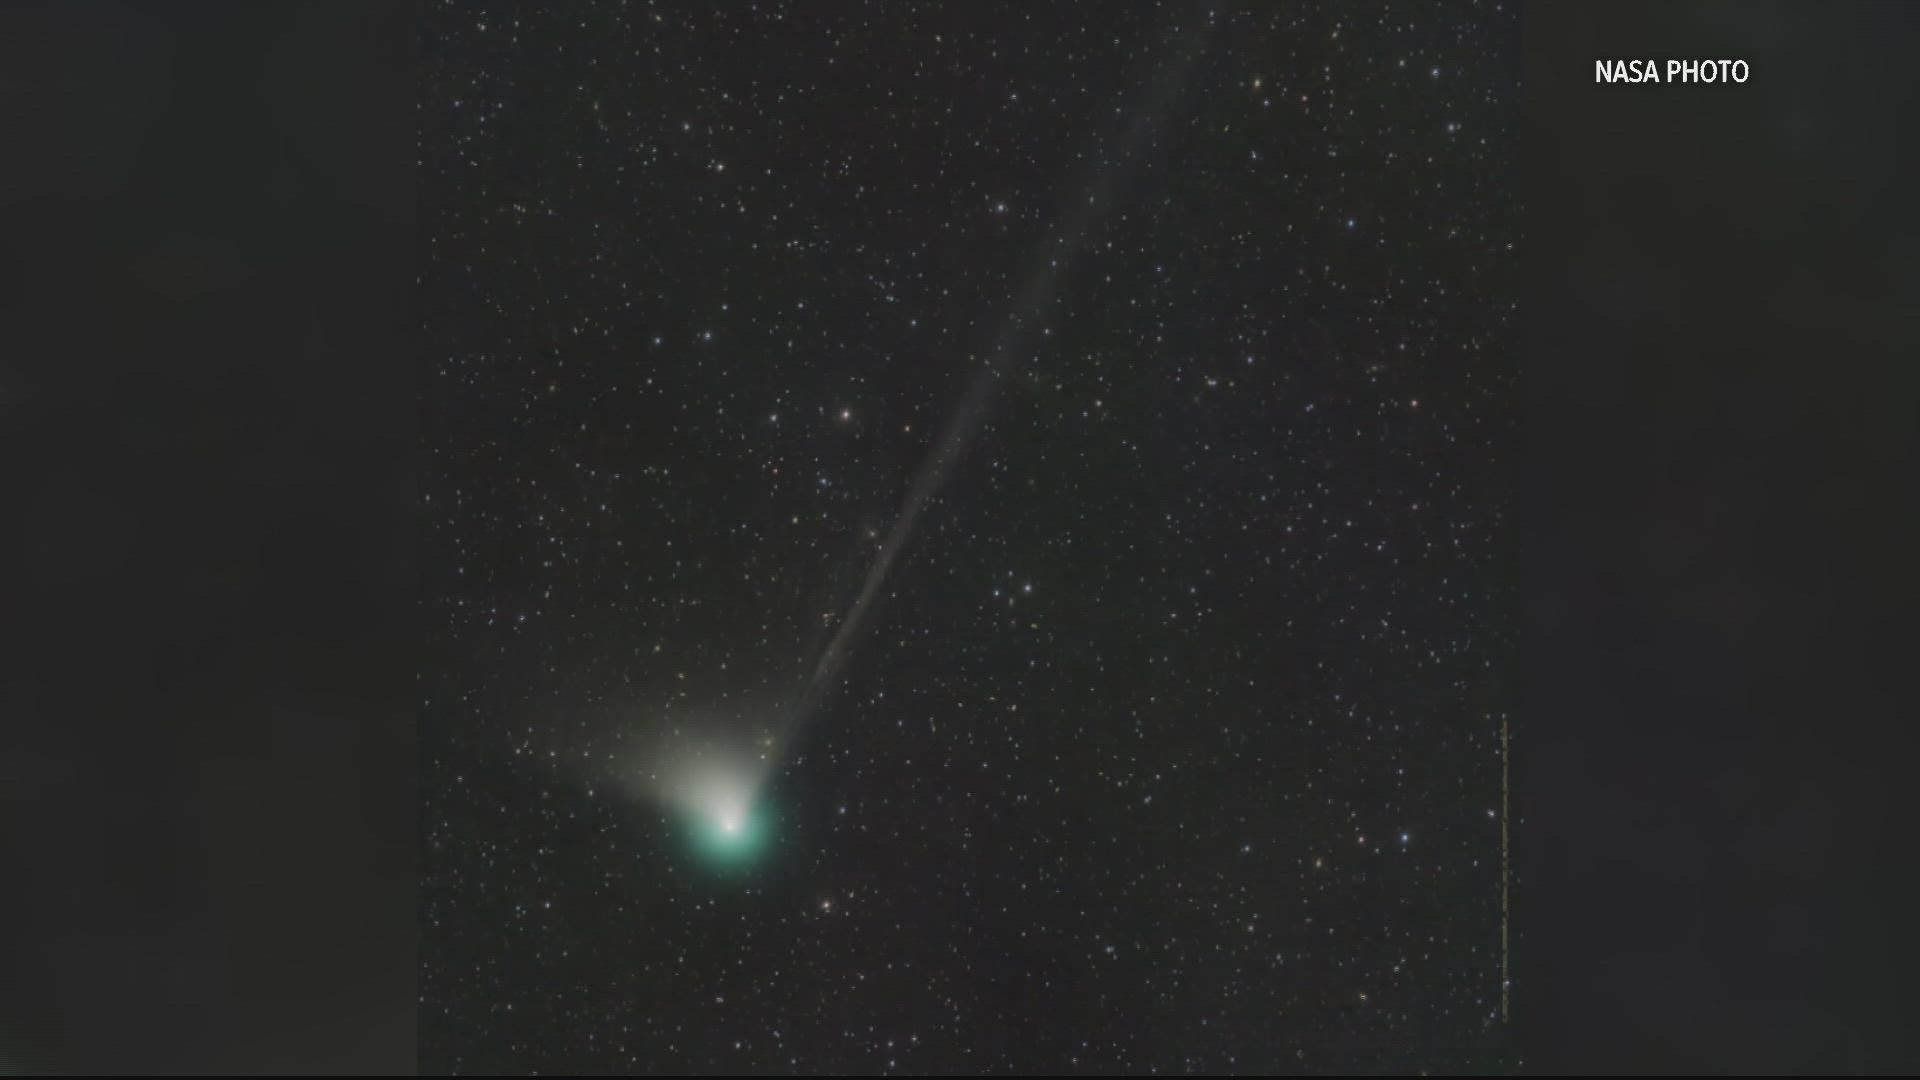 A once in a lifetime comet is rapidly approaching it's closest proximity to Earth and will reach its brightest point in early February.